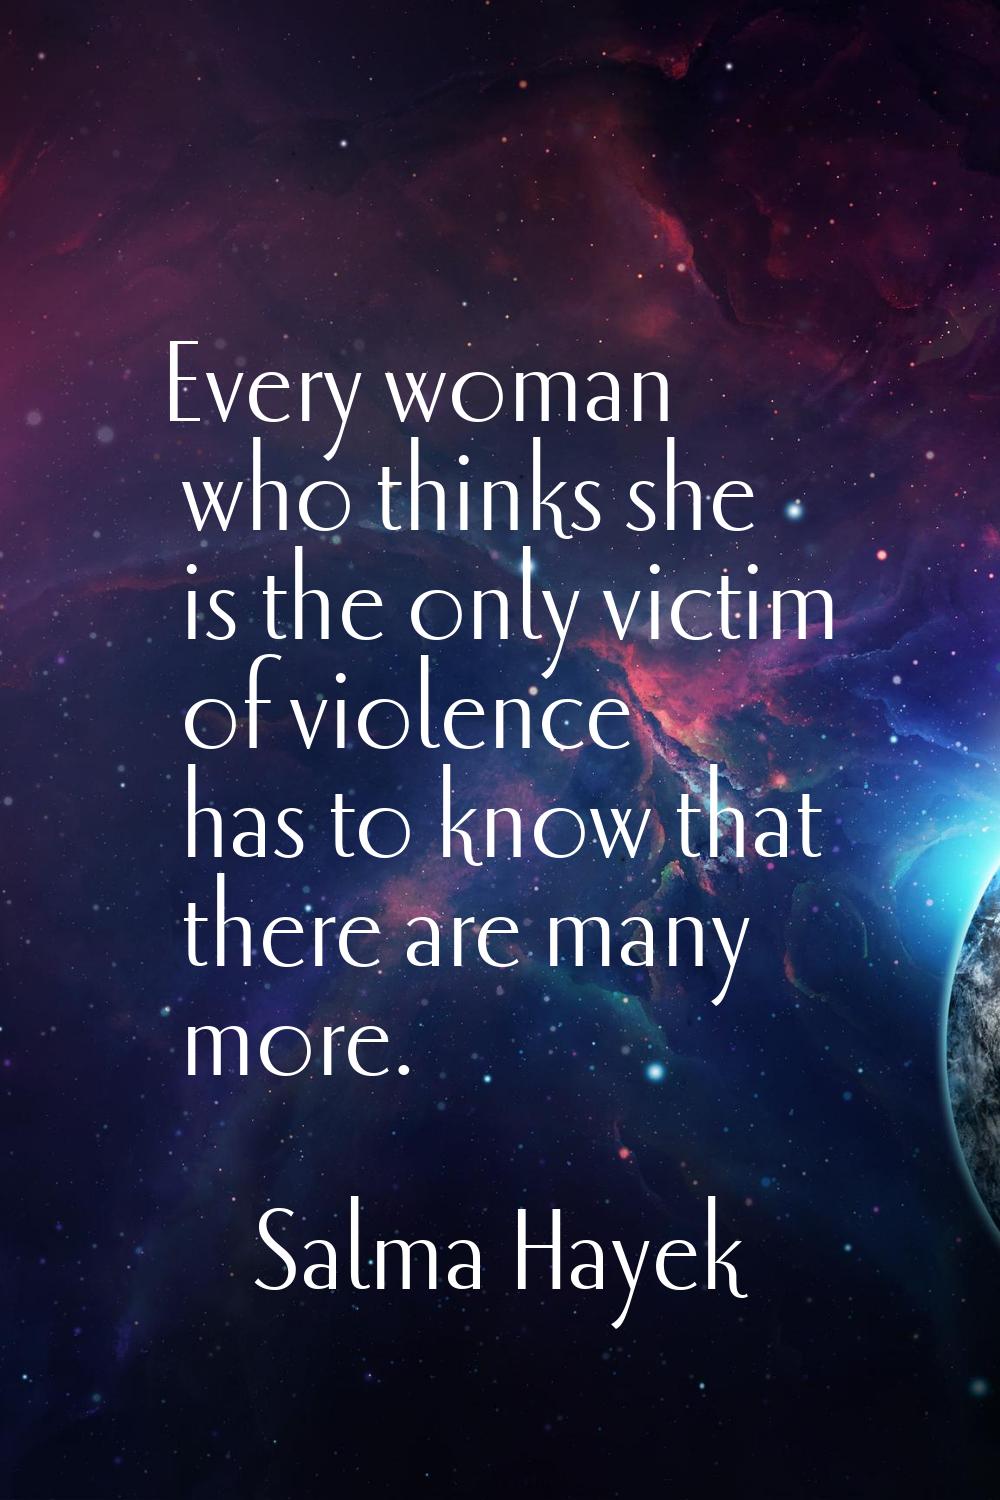 Every woman who thinks she is the only victim of violence has to know that there are many more.